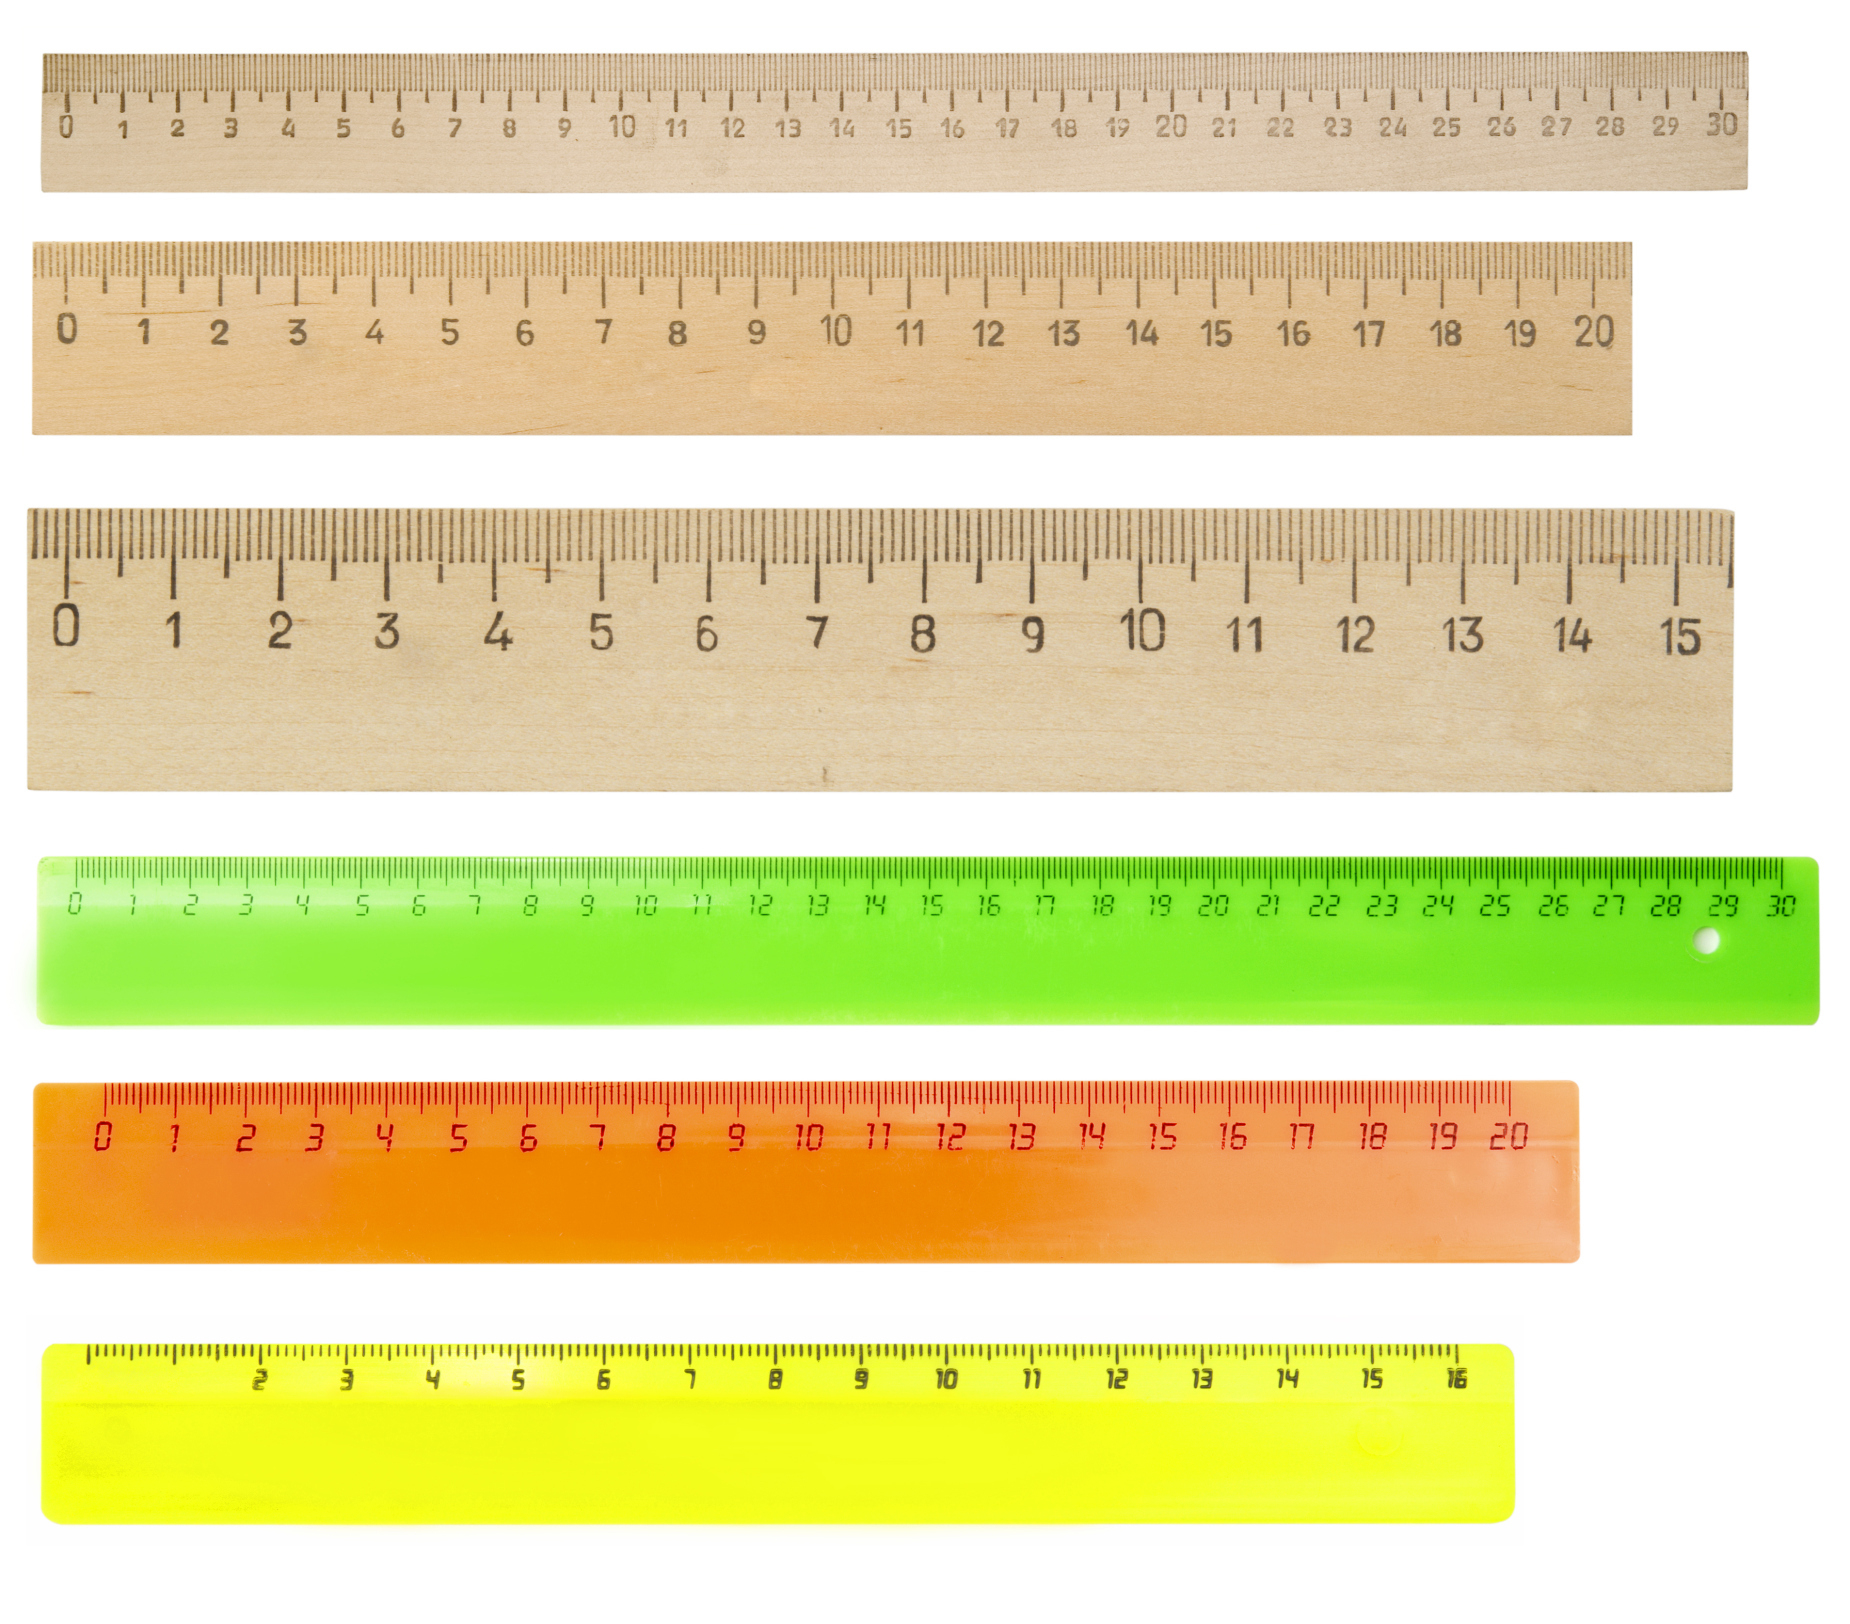 How To Read Centimeter Measurements On A Ruler